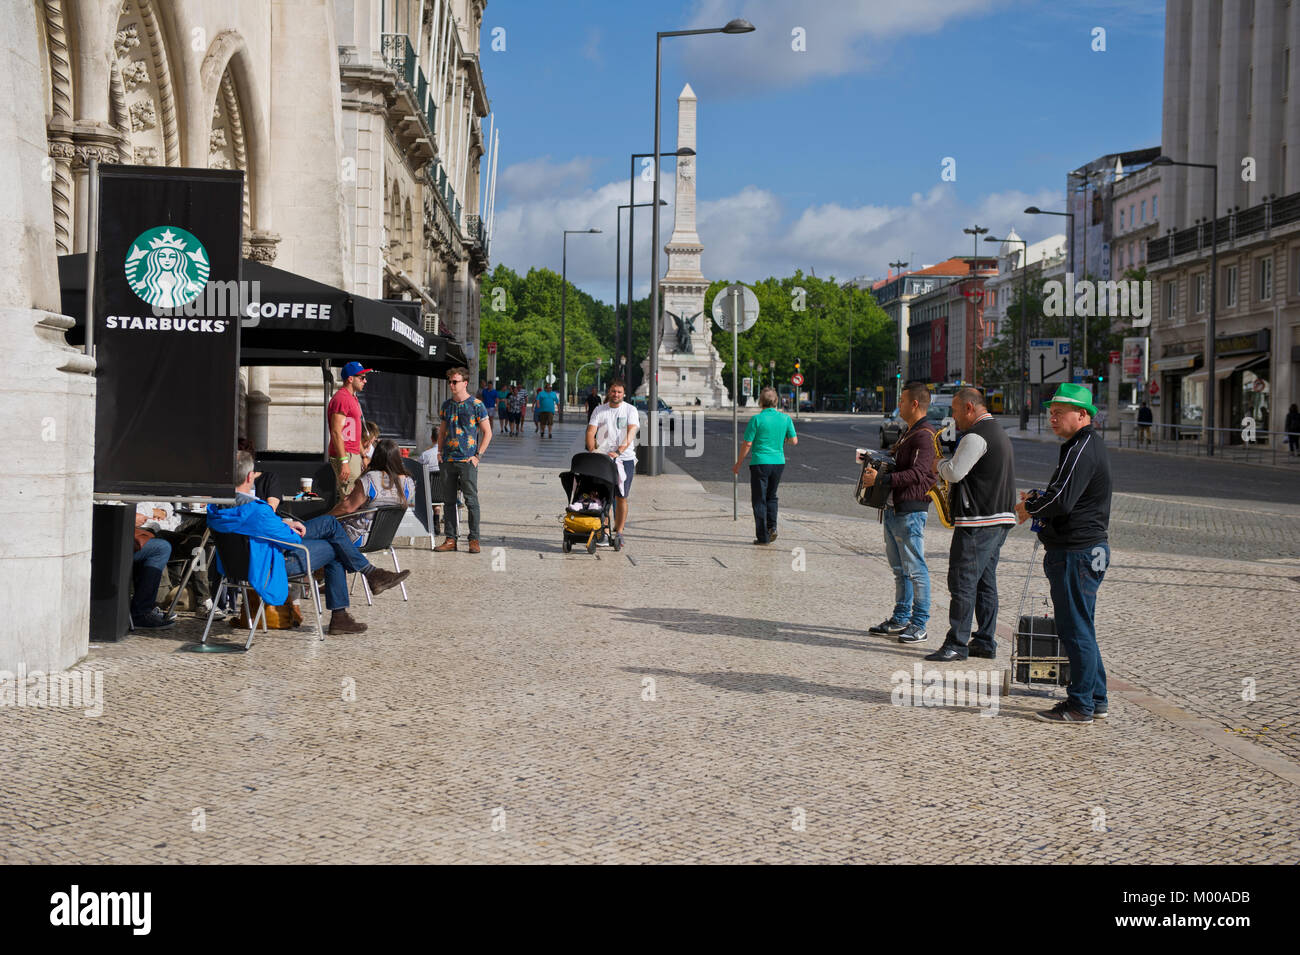 People relaxing outside Starbucks Cafe, Lisbon, Portugal Stock Photo